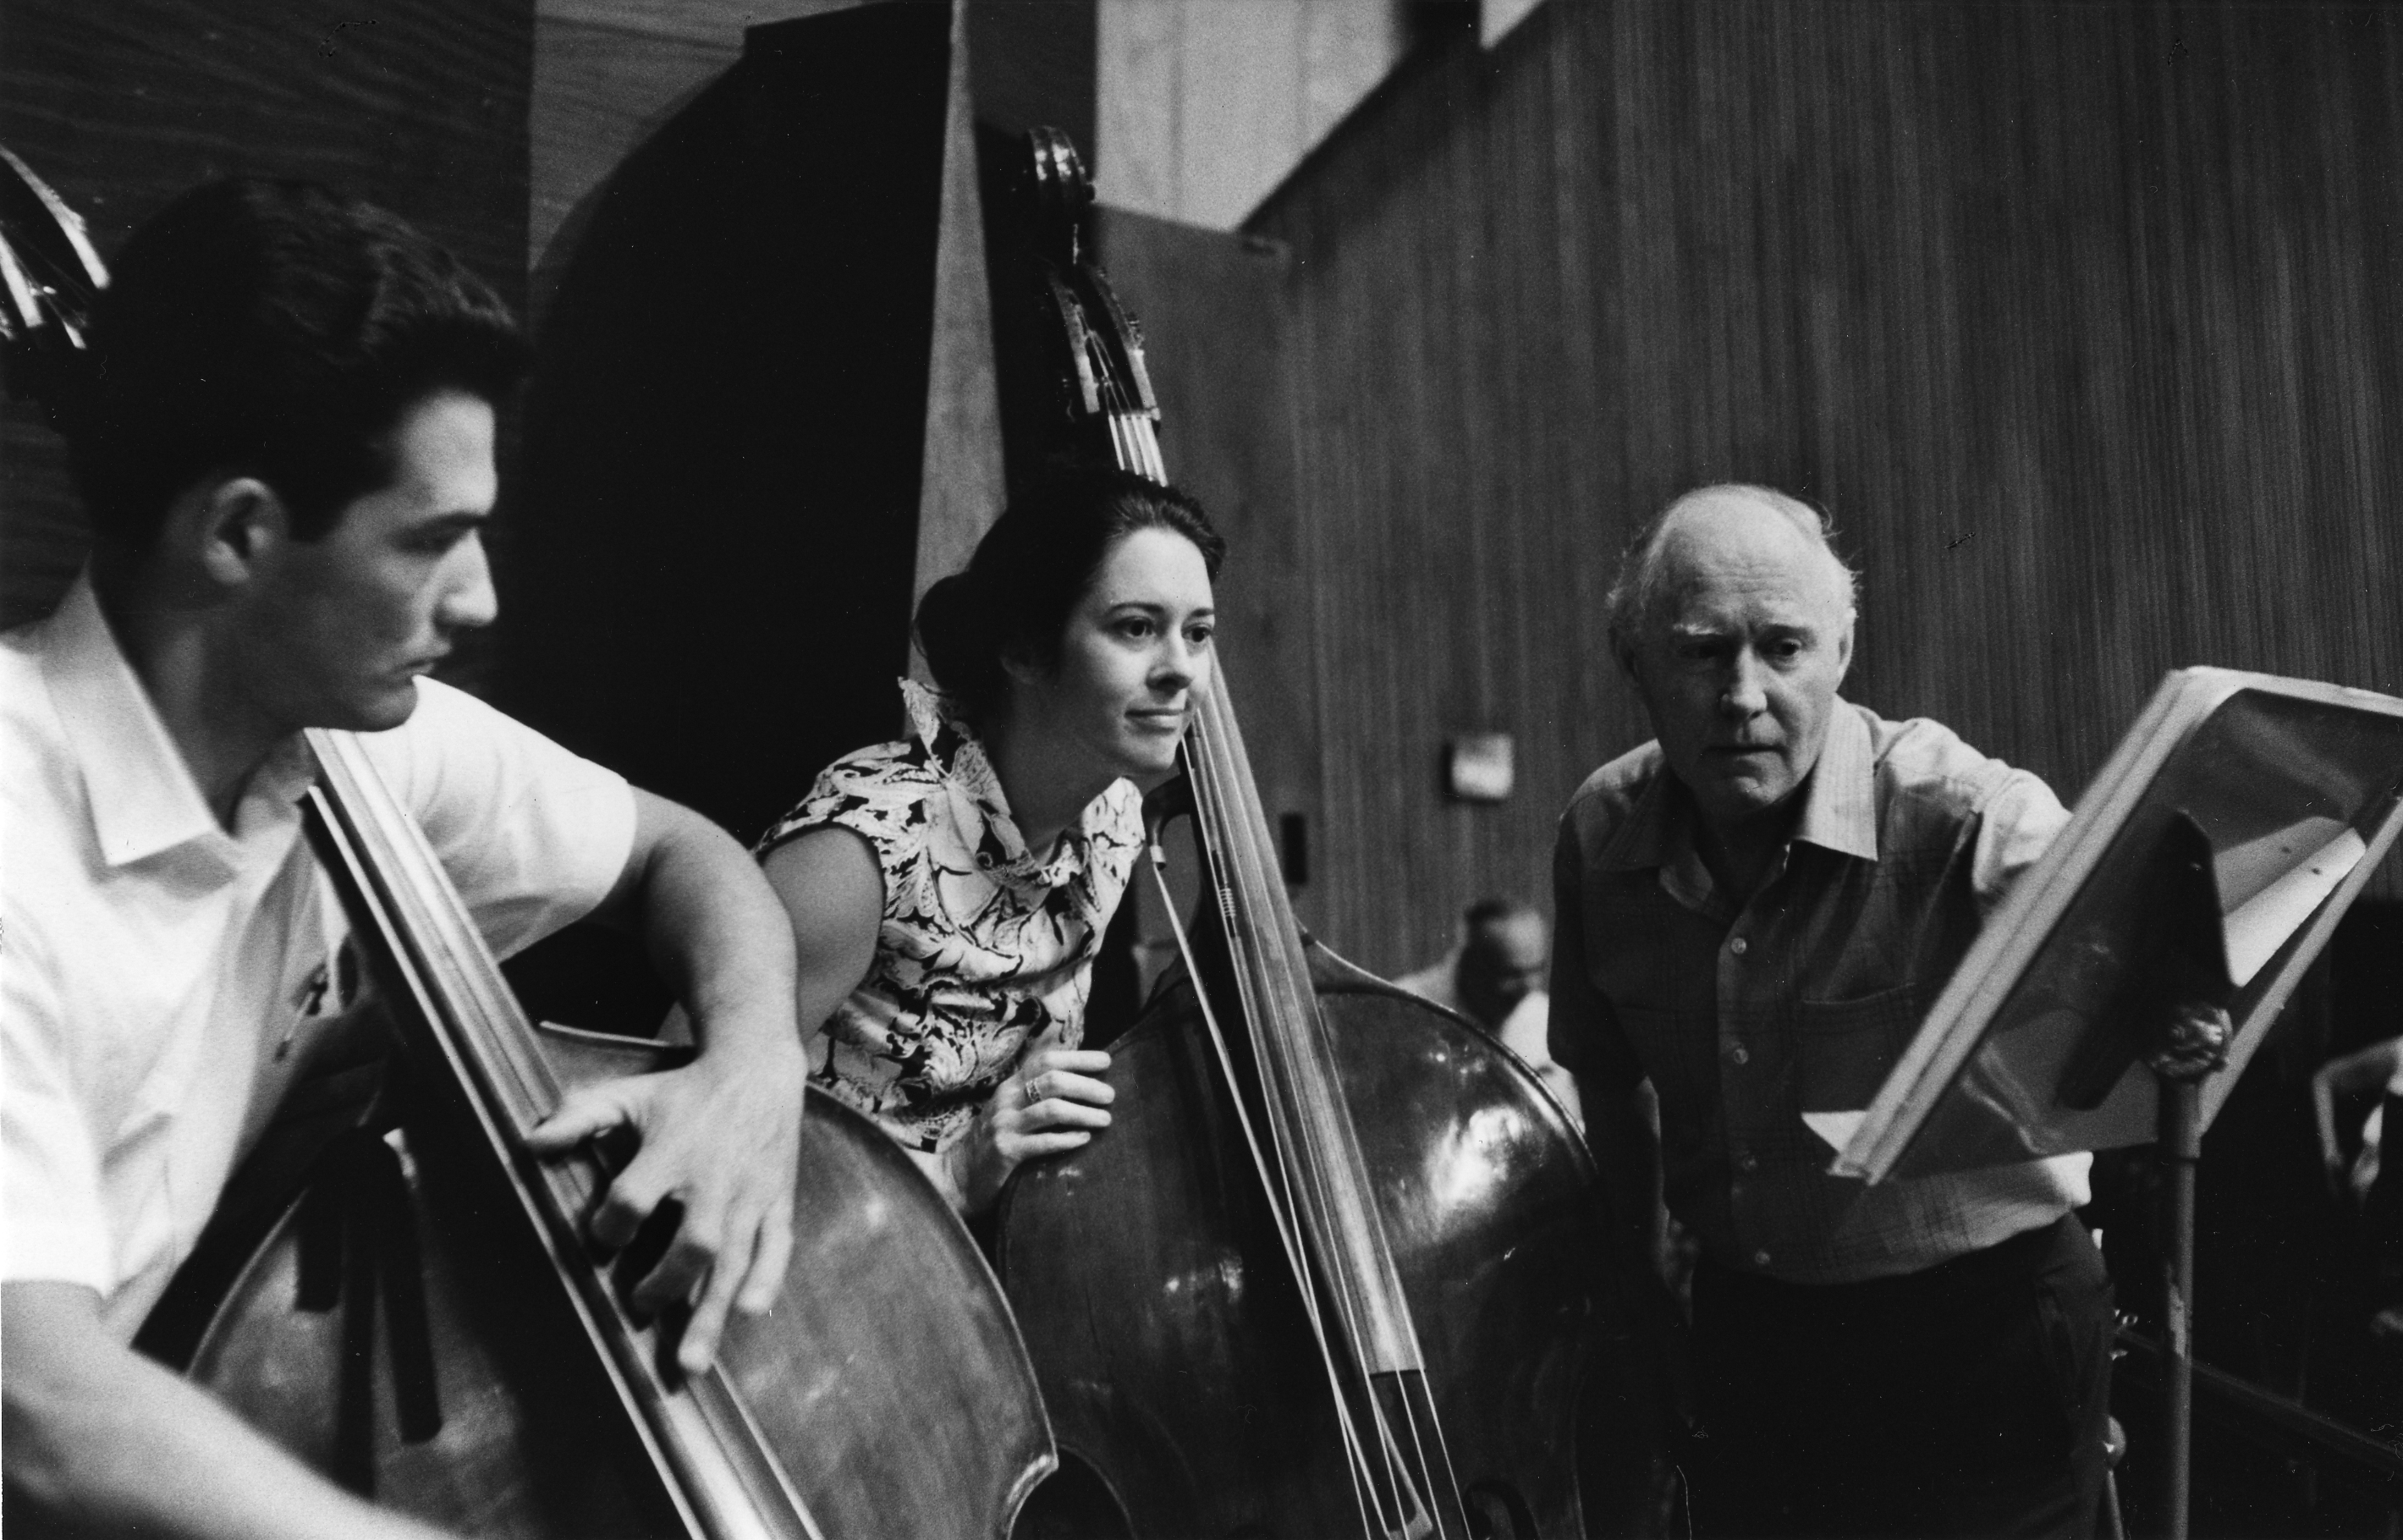 Philharmonic bassists in 1970